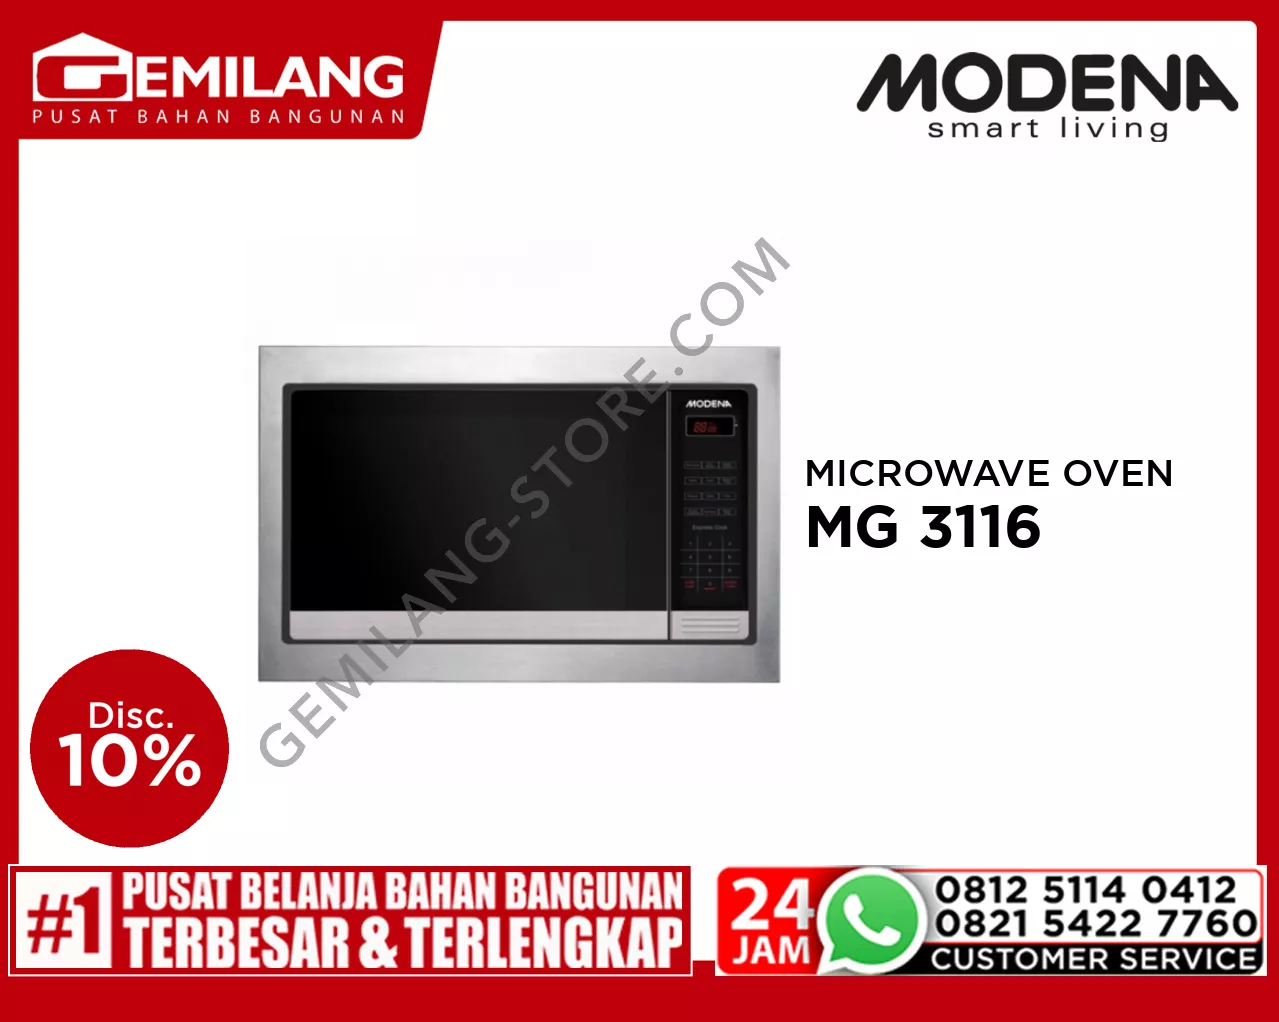 MODENA MICROWAVE OVEN MG 3116